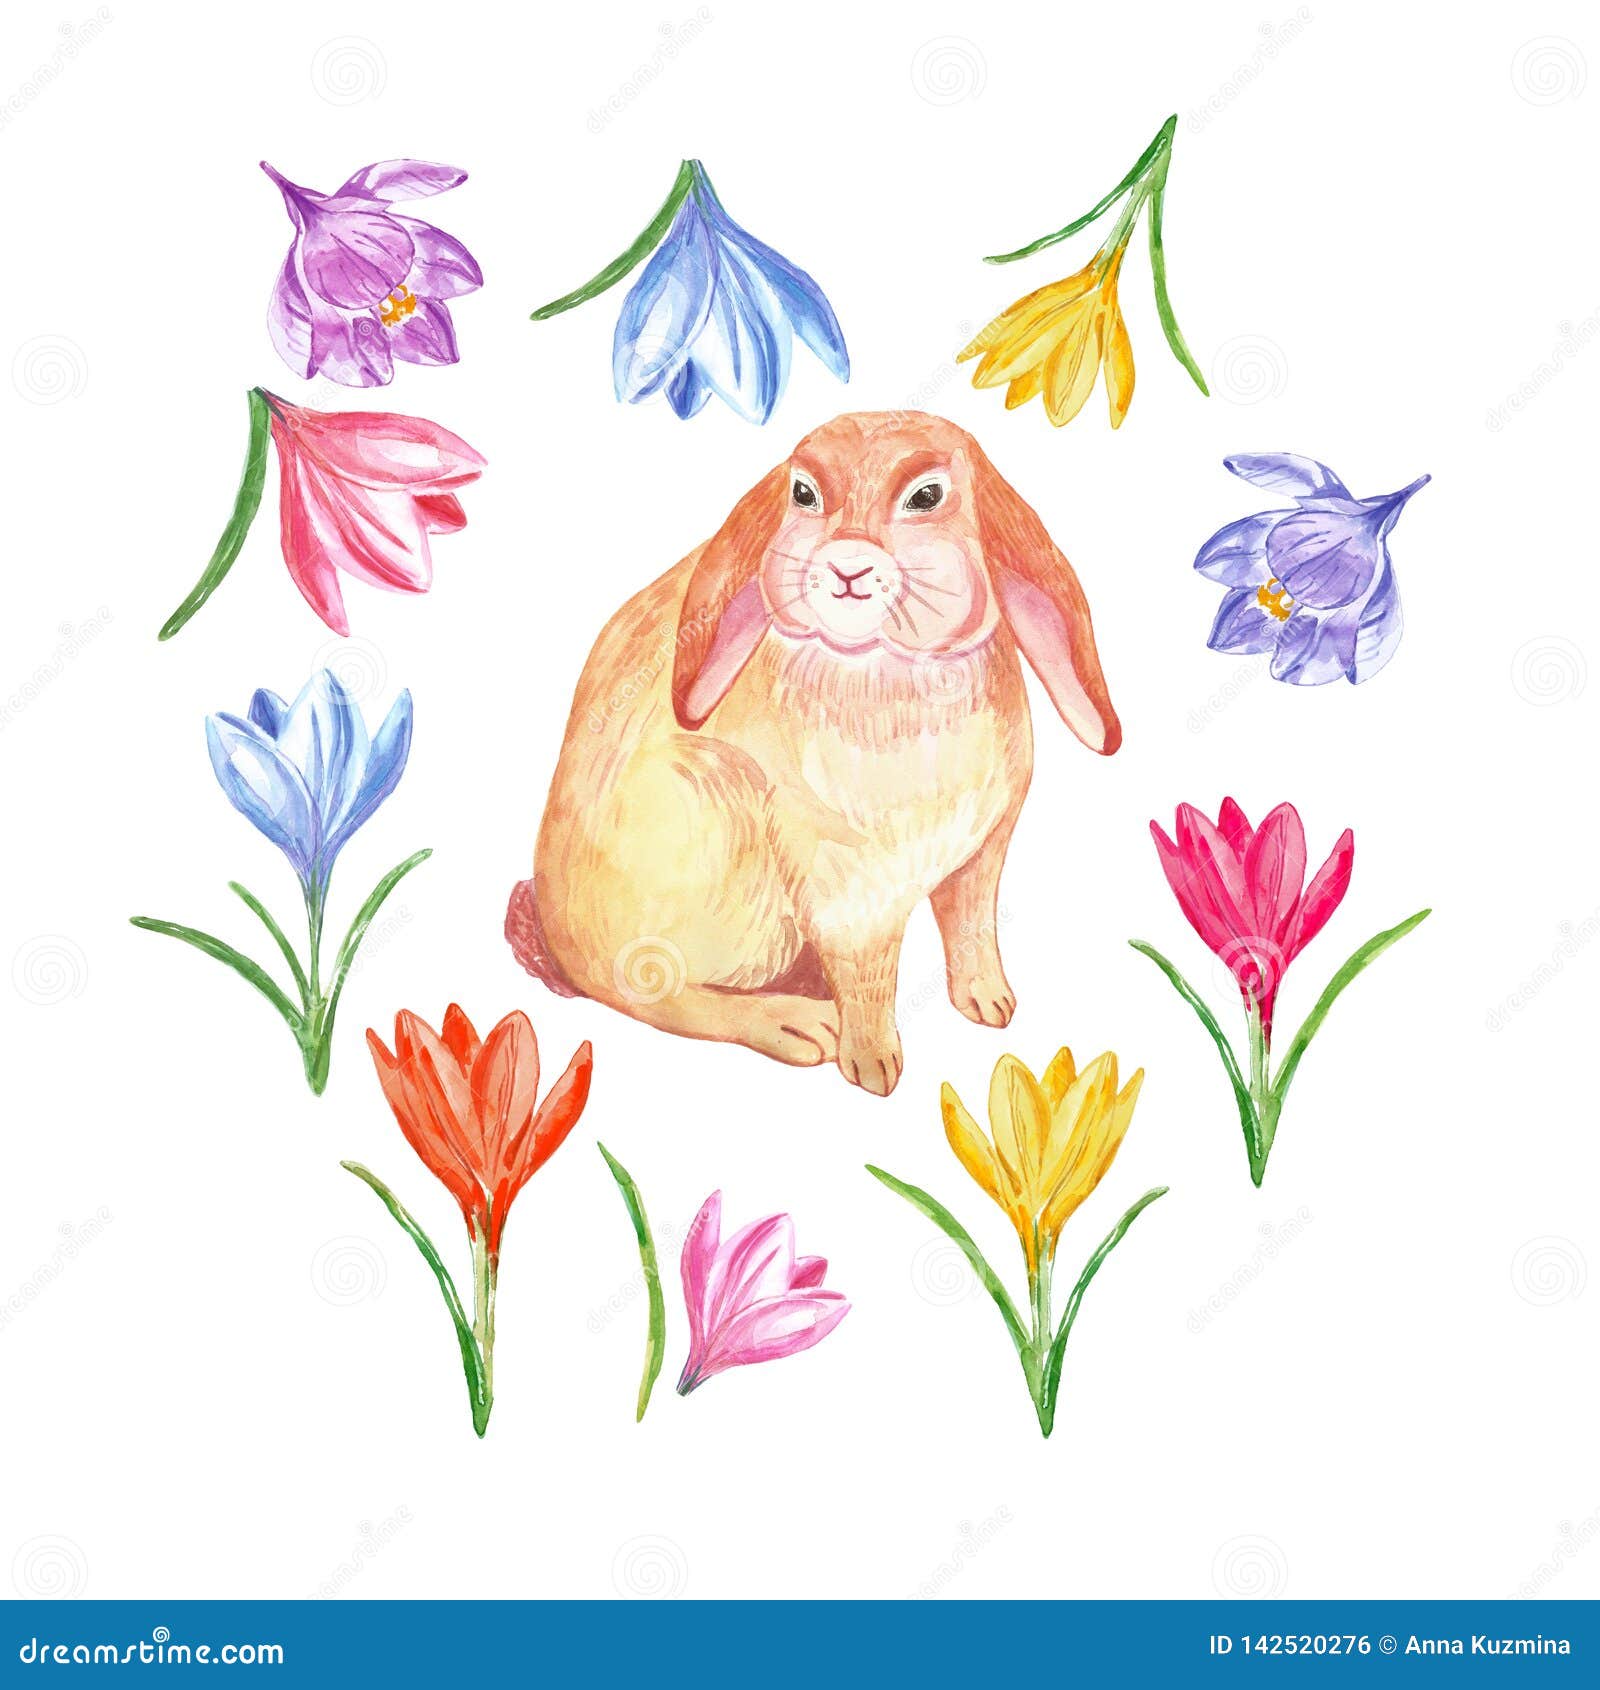 watercolor cute rabbit  on wite background. easter bunny with colorful spring flowers for cards, invitations